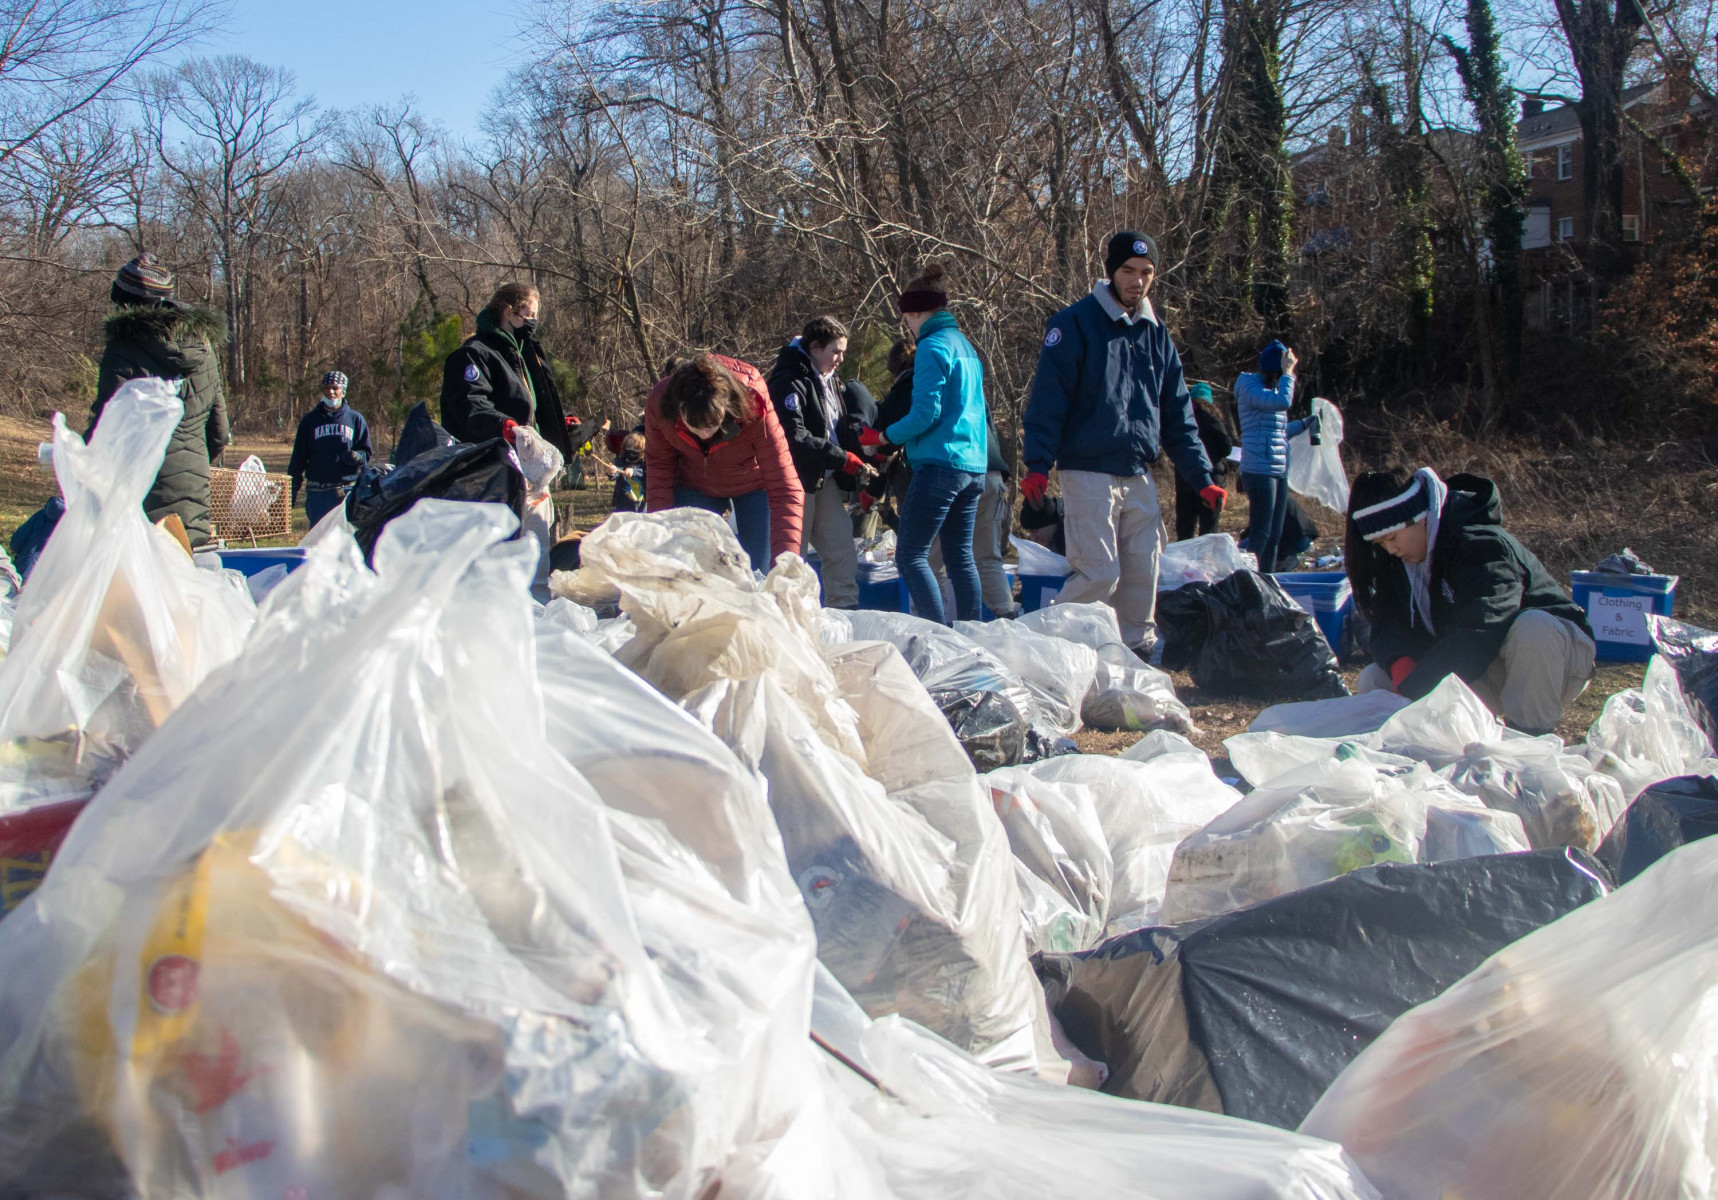 Volunteers in winter gear collect trash into many bags in a wooded clearing.